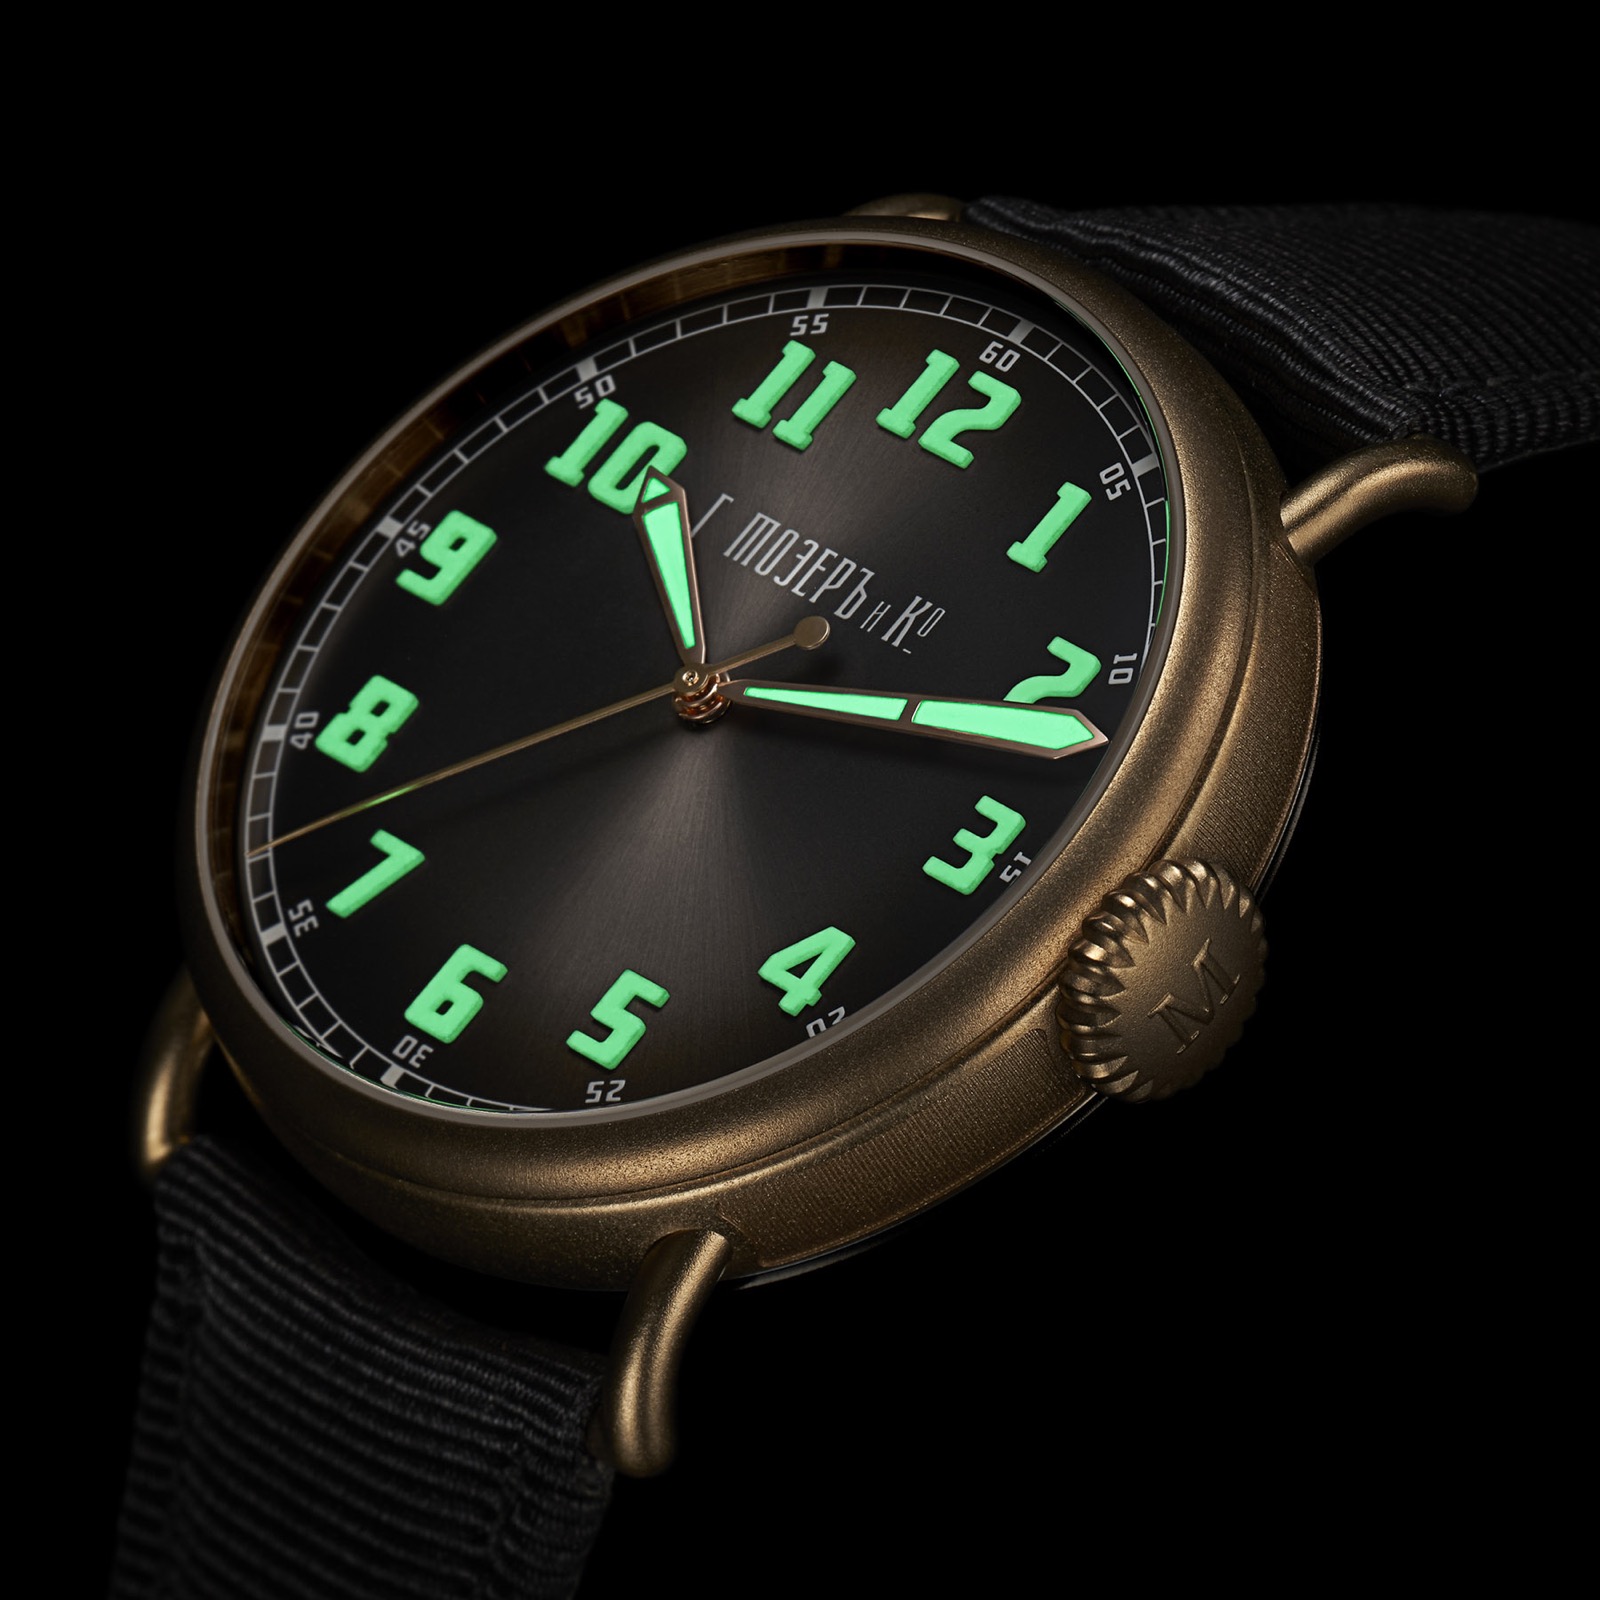 H. Moser & Cie. Heritage Bronze "Since 1828"